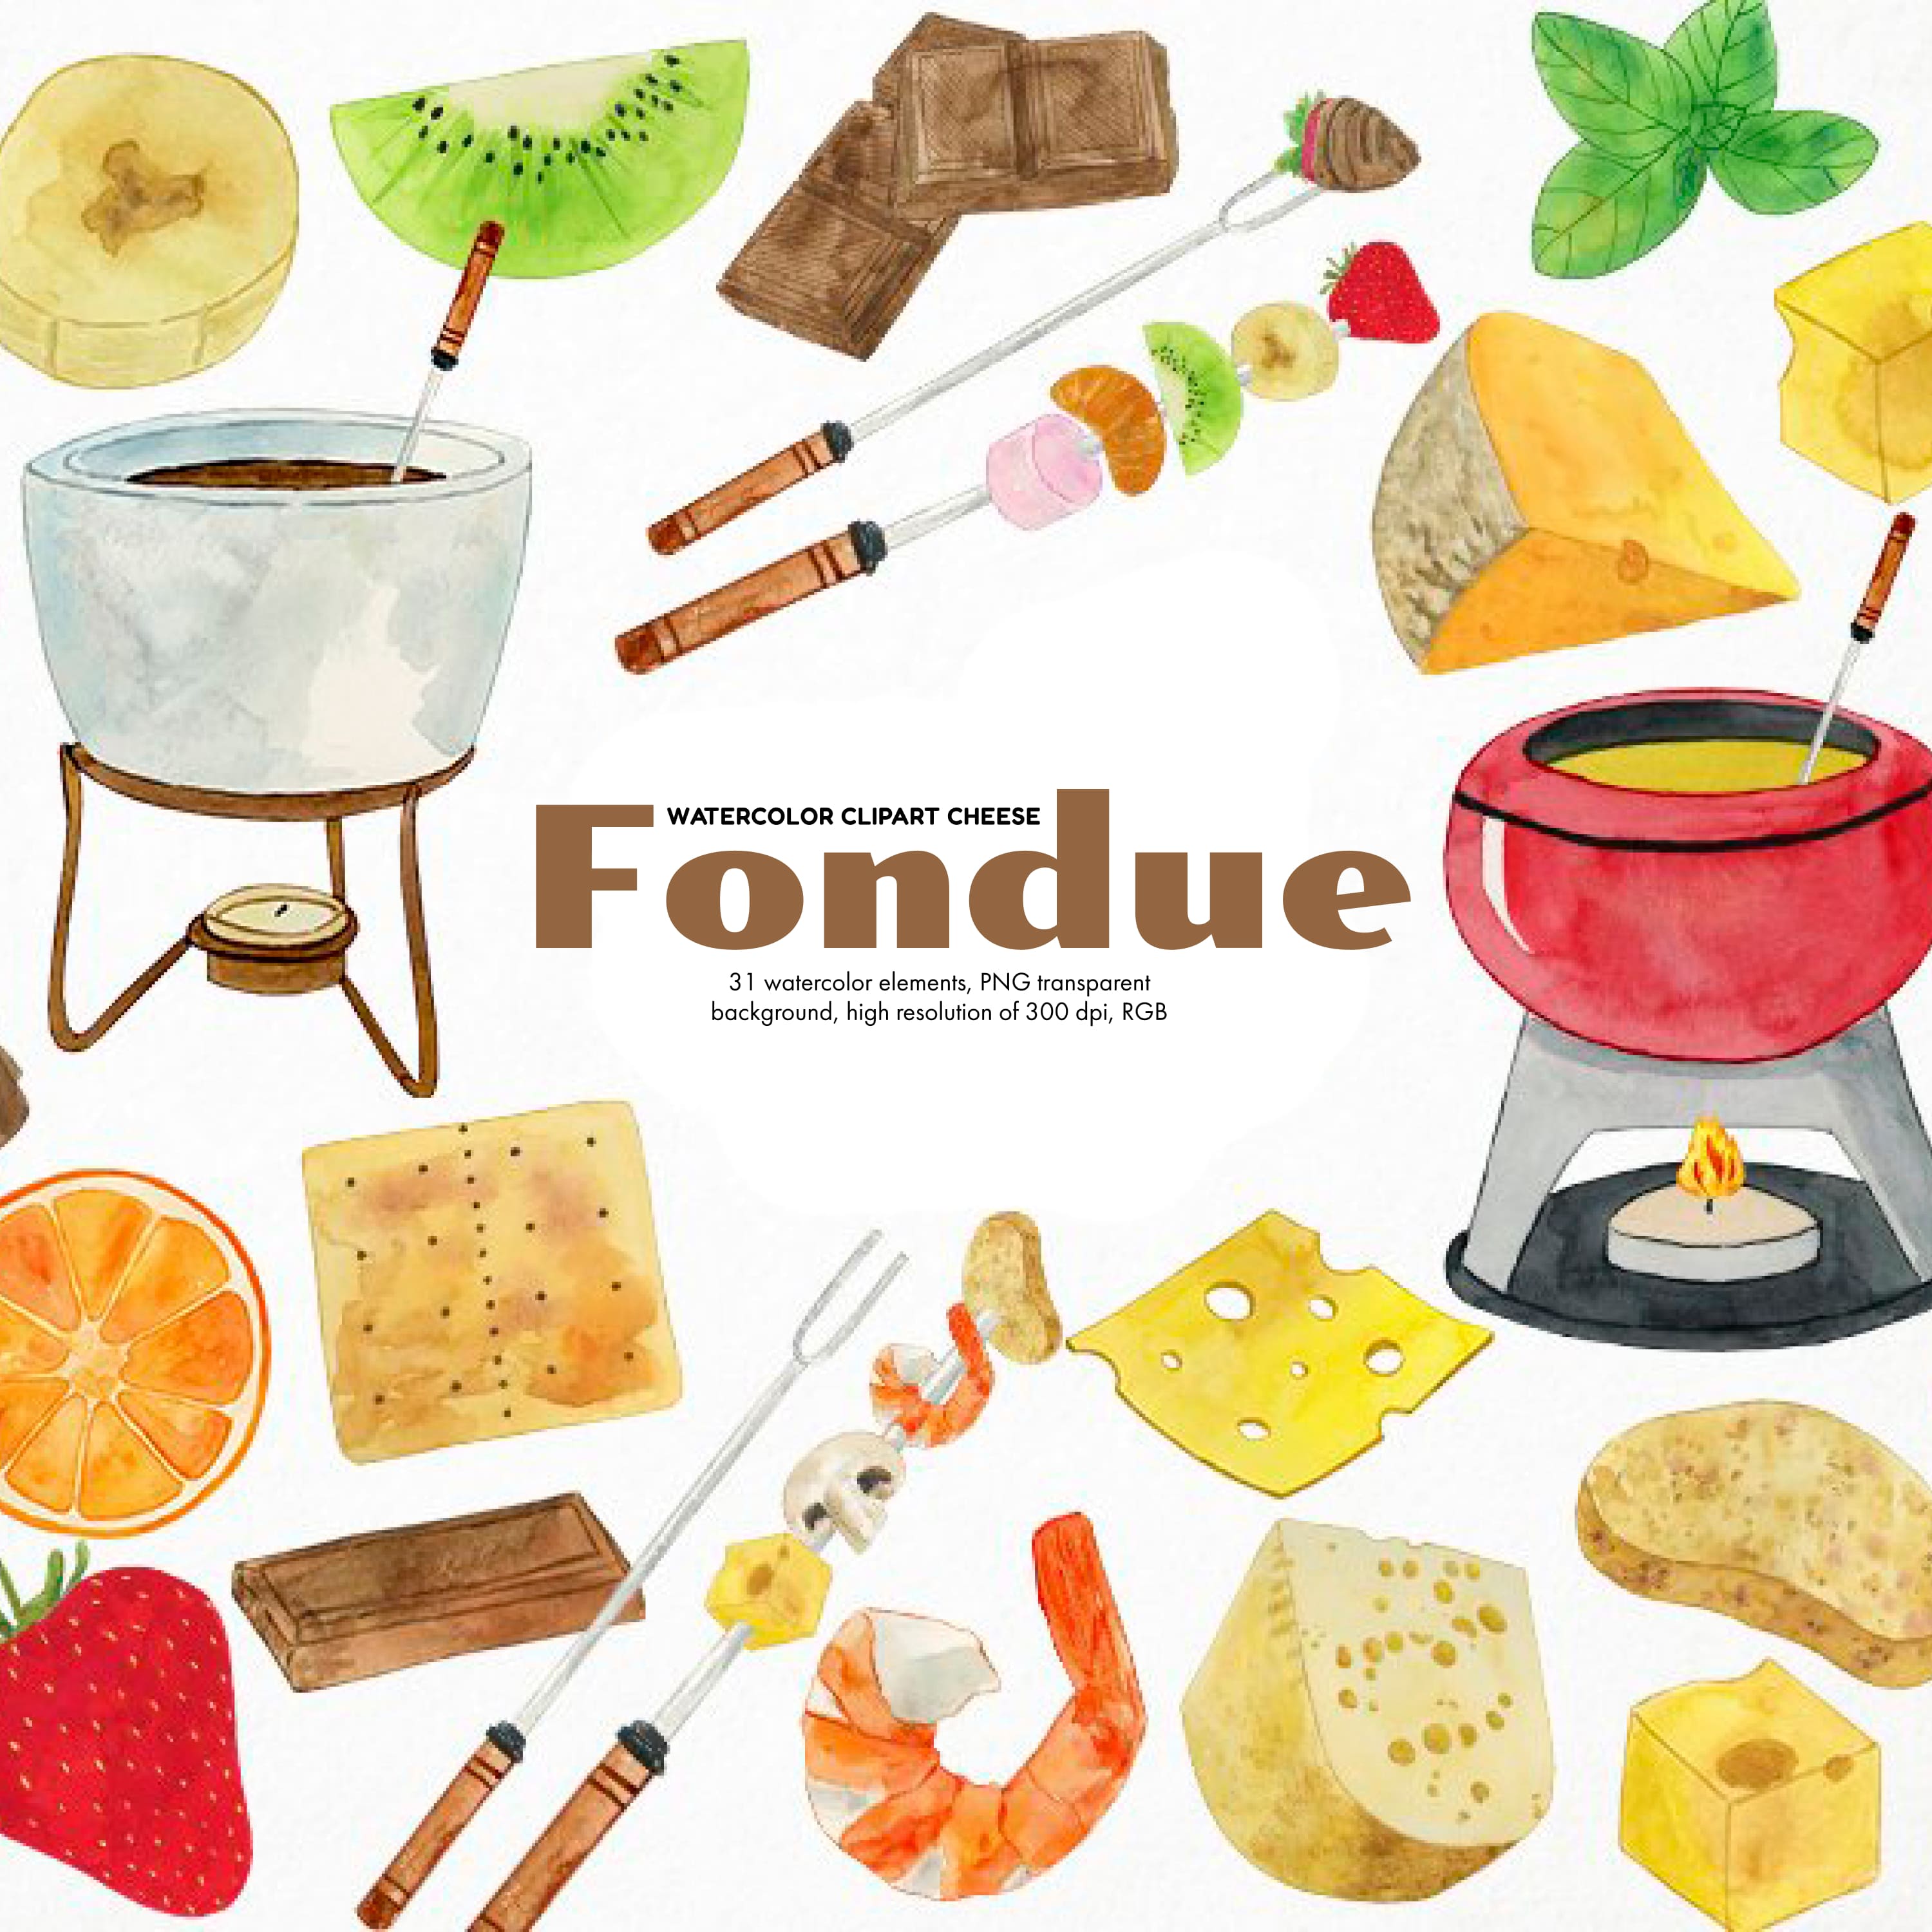 Collection of wonderful images of gourmet cheeses and fruits for fondue.